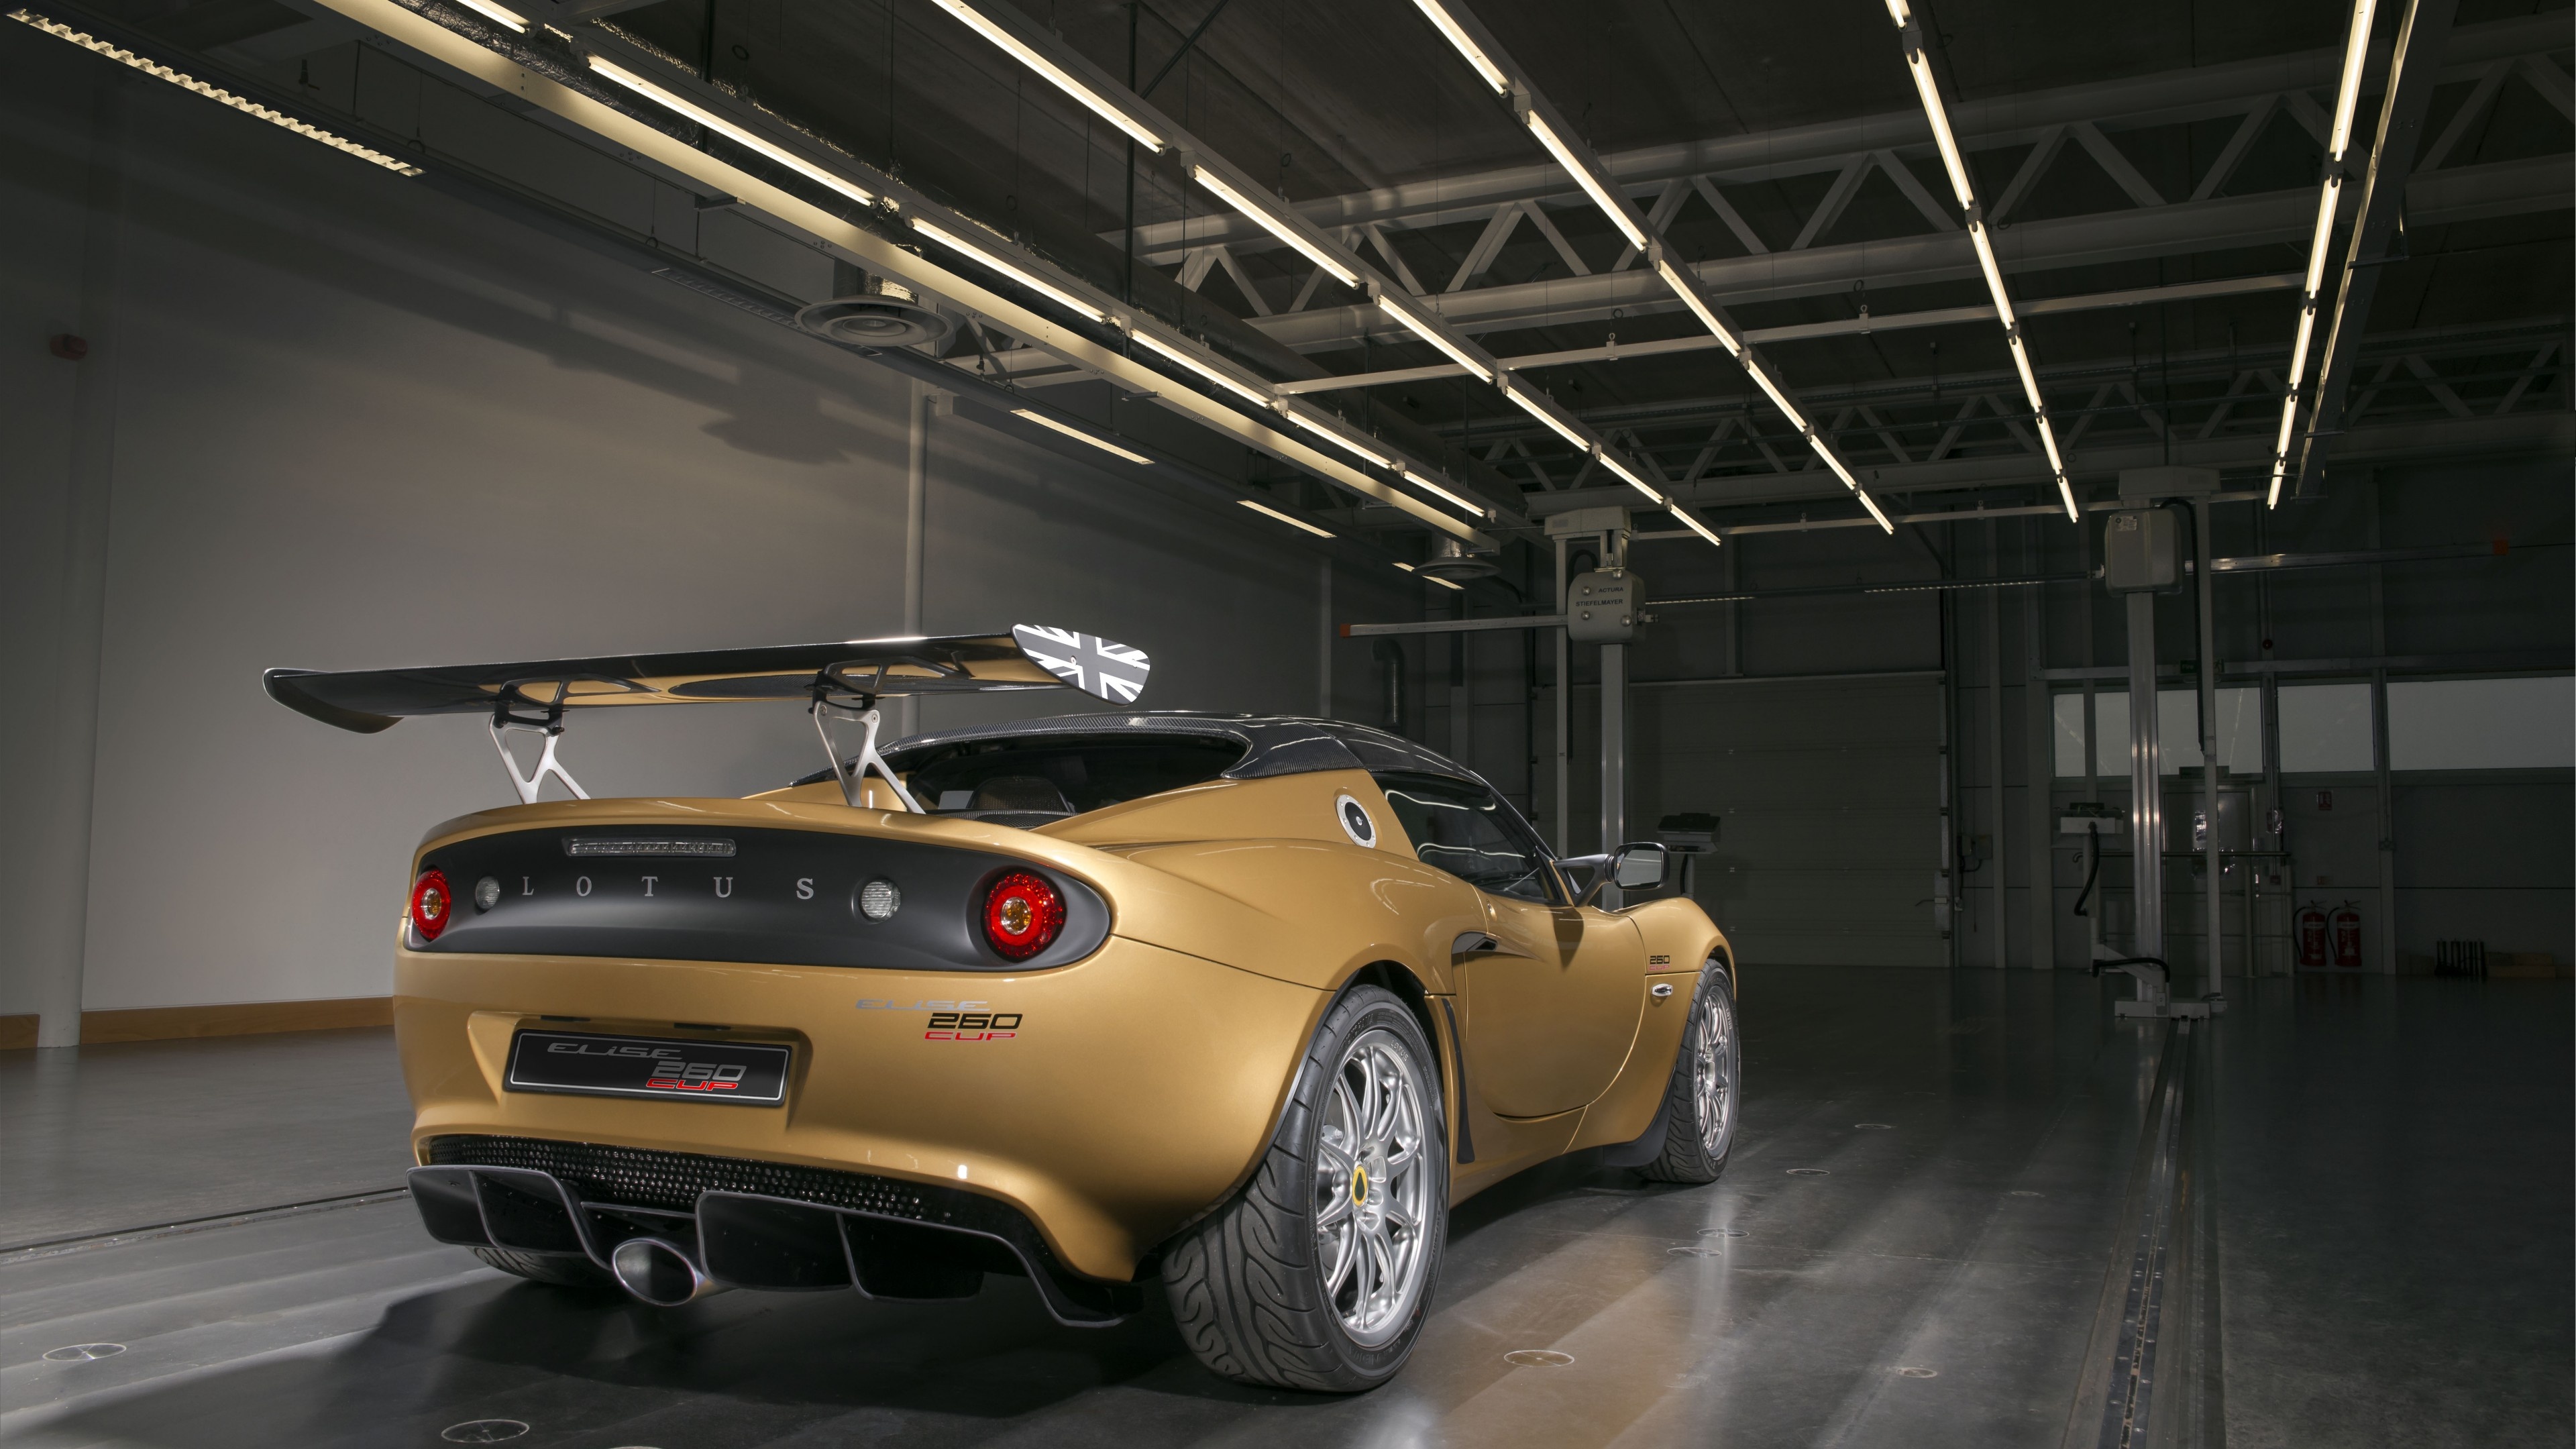 Lotus Elise, Track-ready performance, Sports car excellence, Unmatched speed, 3840x2160 4K Desktop